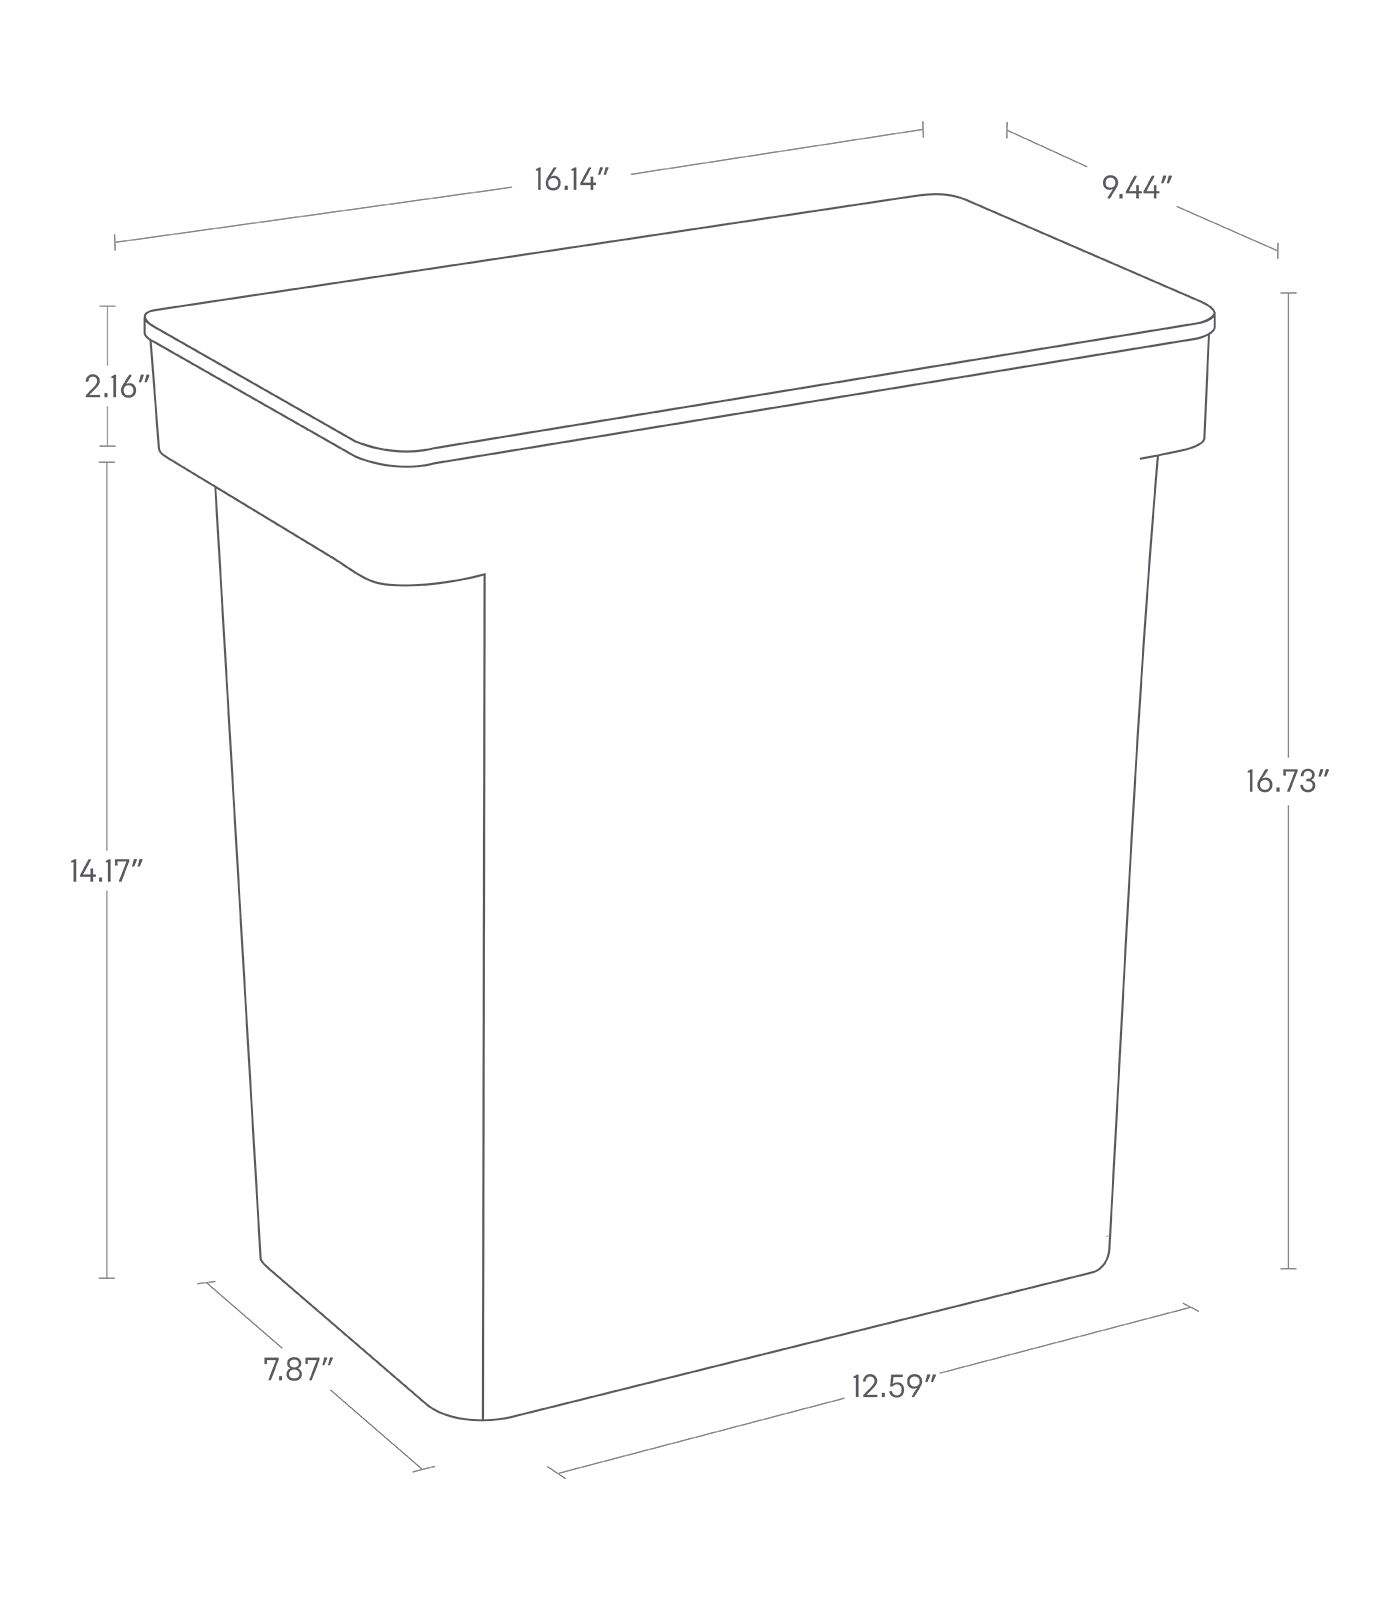 Dimension image for Airtight Rolling Trash Can on a white background including dimensions  L 9.45 x W 16.14 x H 20.67 inches